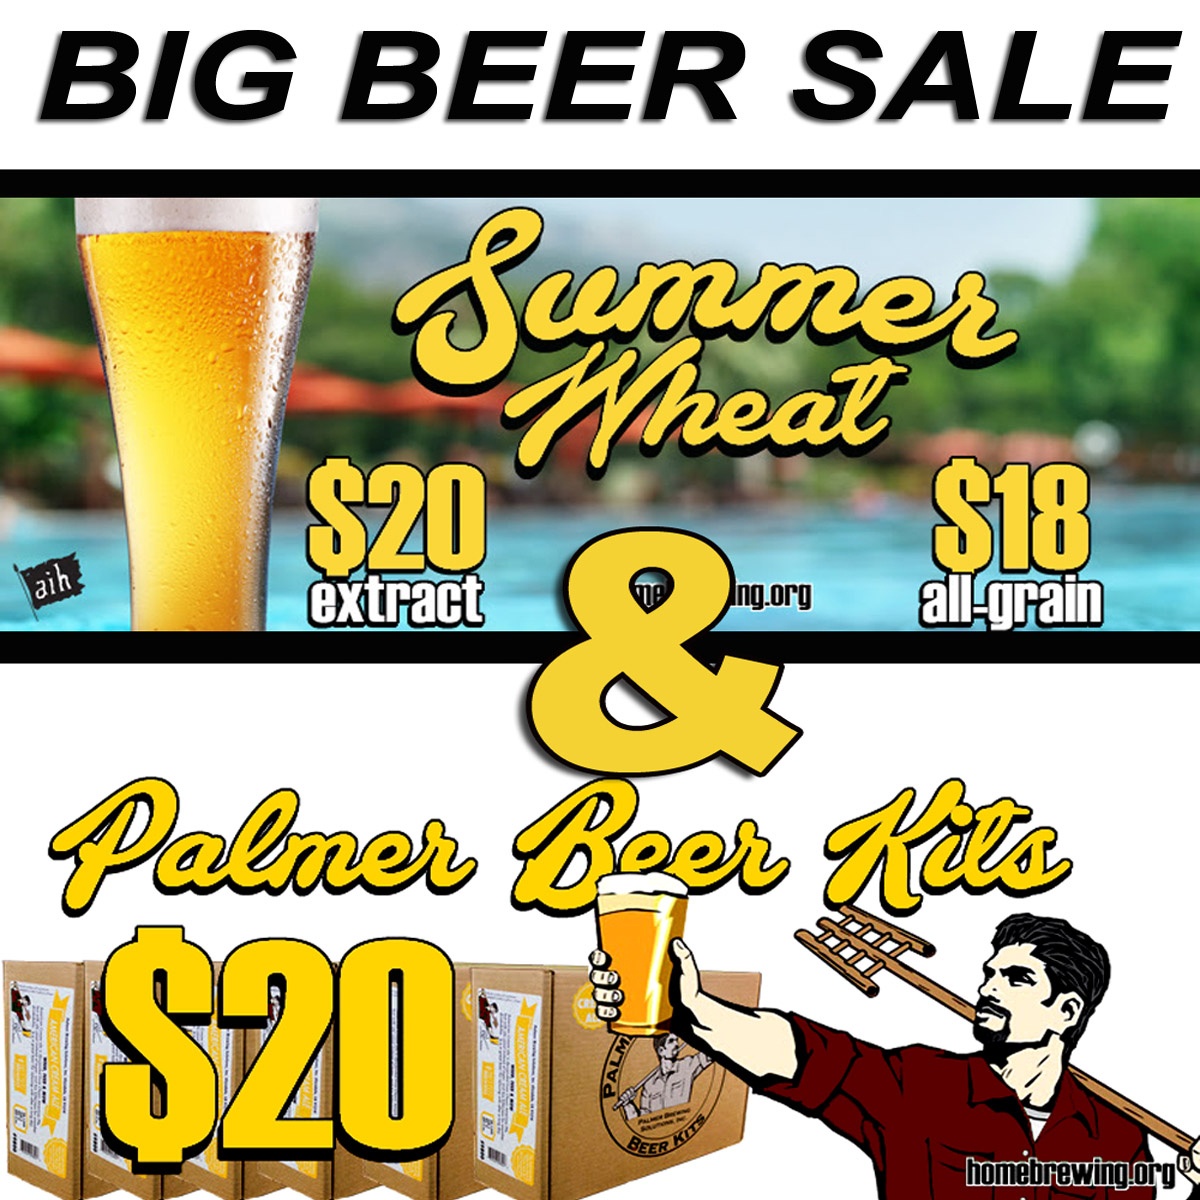 Beer Coupons And Beer Discounts : Yatra Coupon Codes 2018 For - Free - Free Printable Beer Coupons